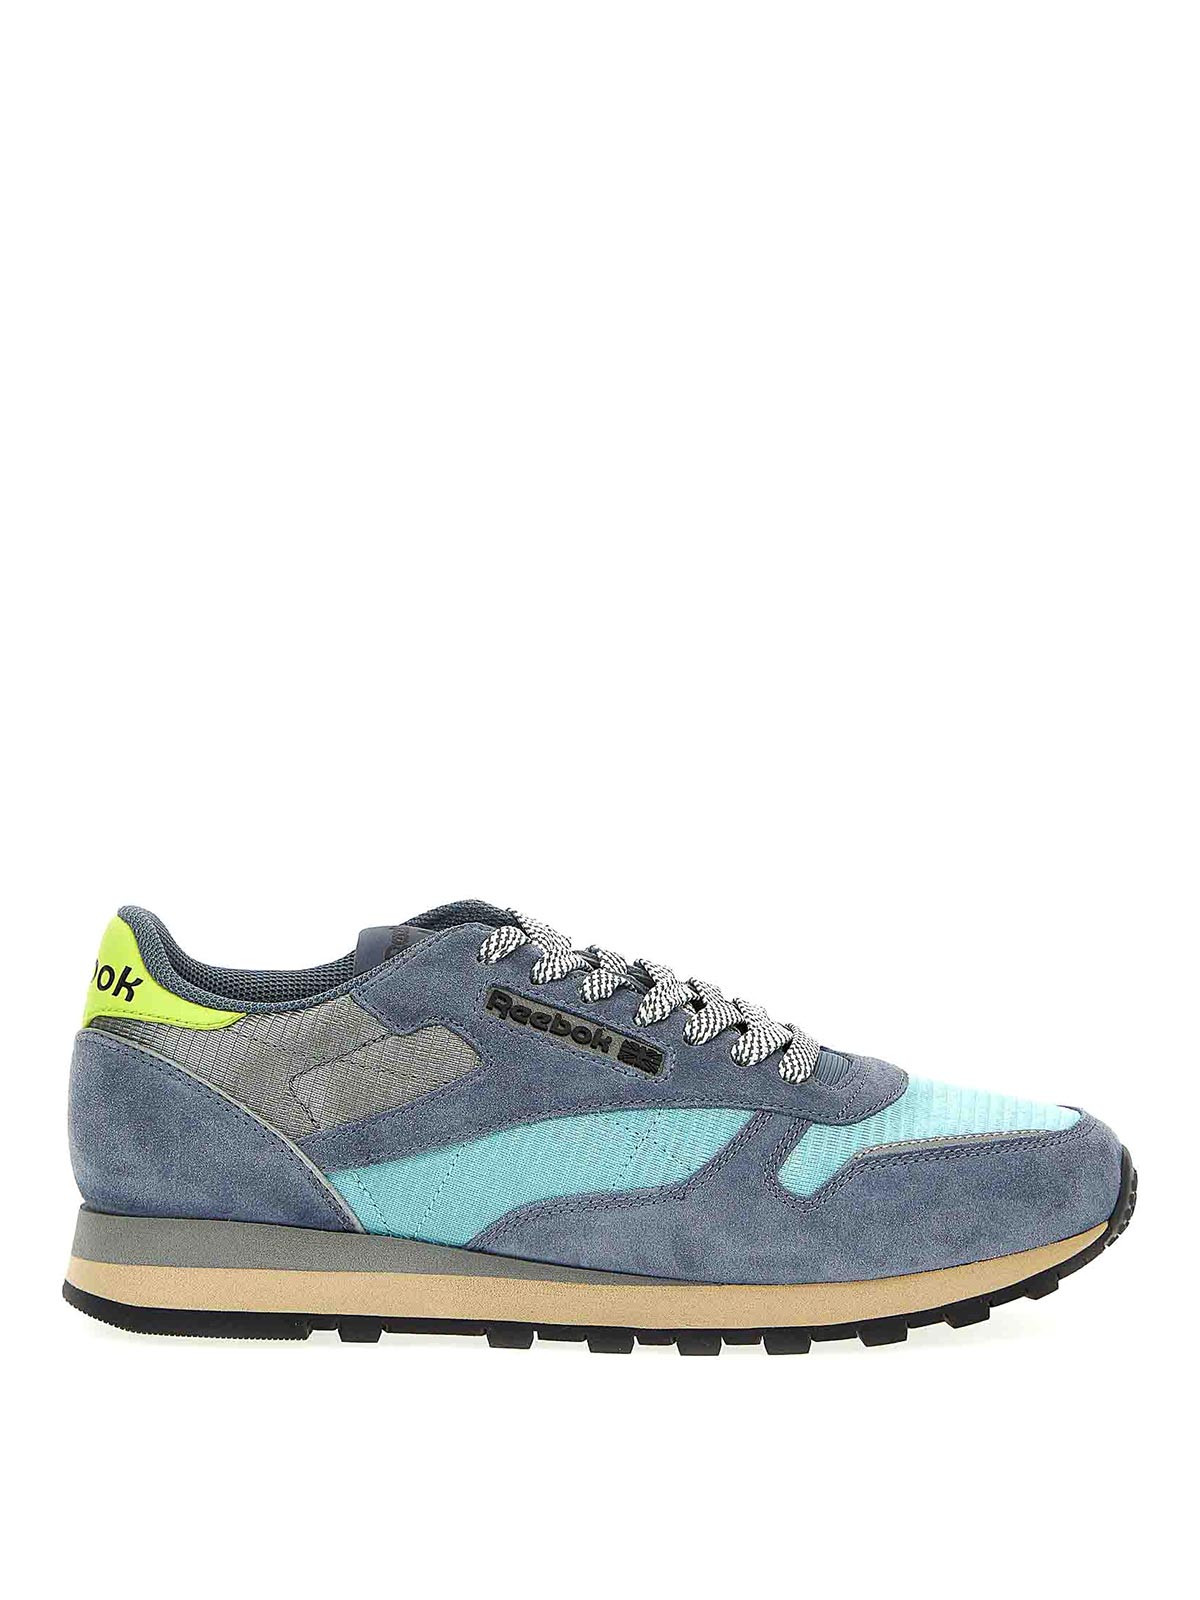 Reebok Classic Leather Sneakers In Light Blue